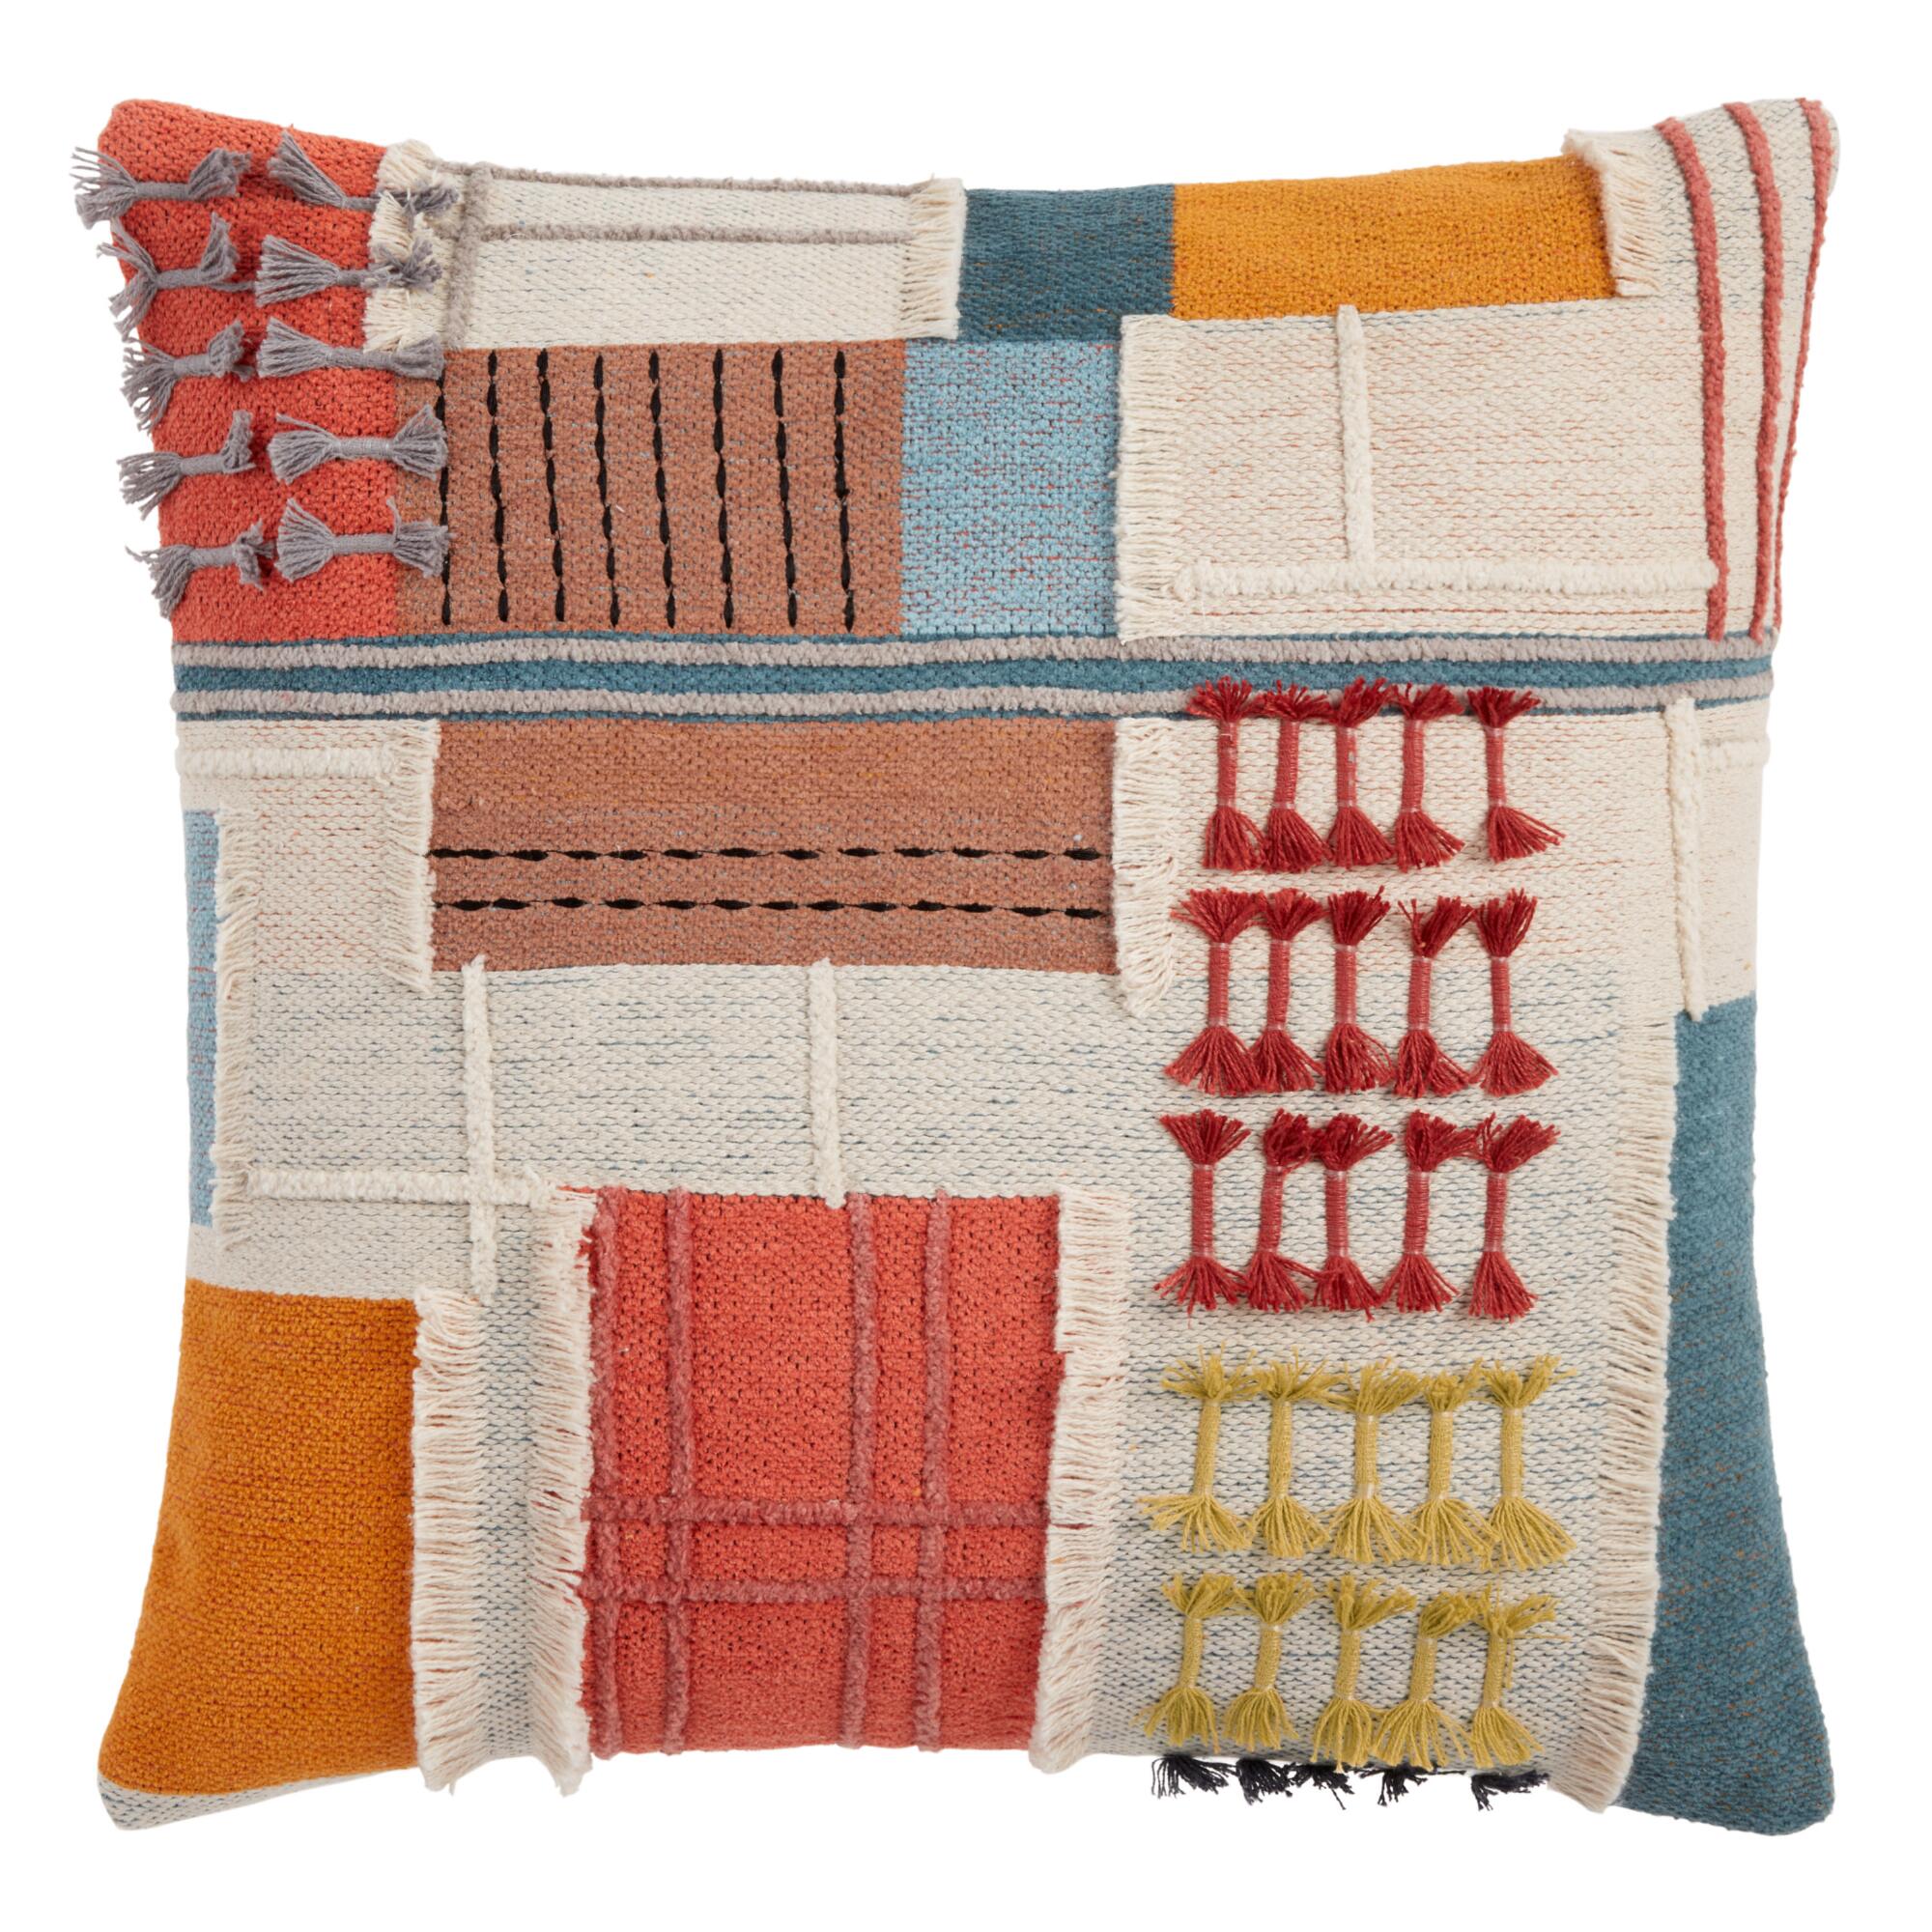 Ivory Multicolor Collage Throw Pillow - Cotton - 18" Square by World Market